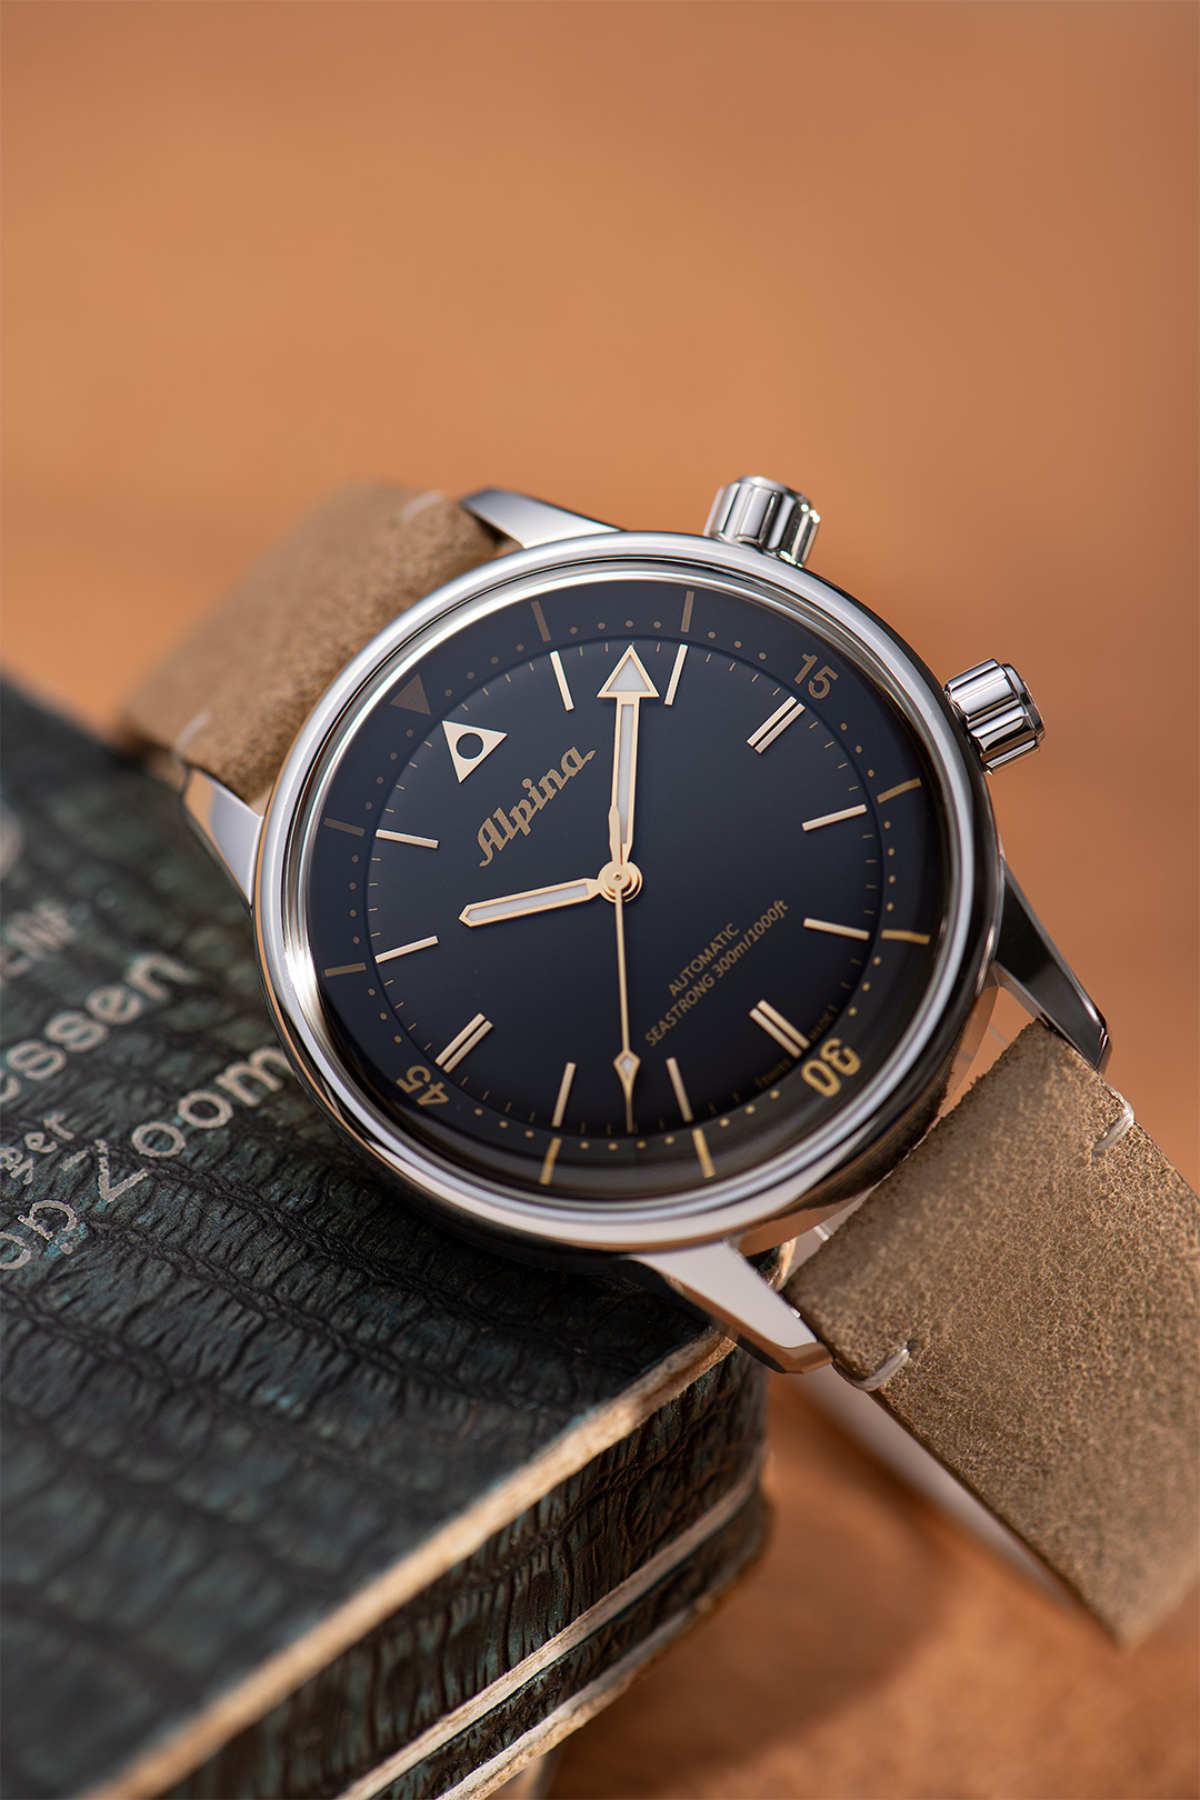 Alpina's Heritage Collection: Two Charming Watches For Mastering The Air And Sea